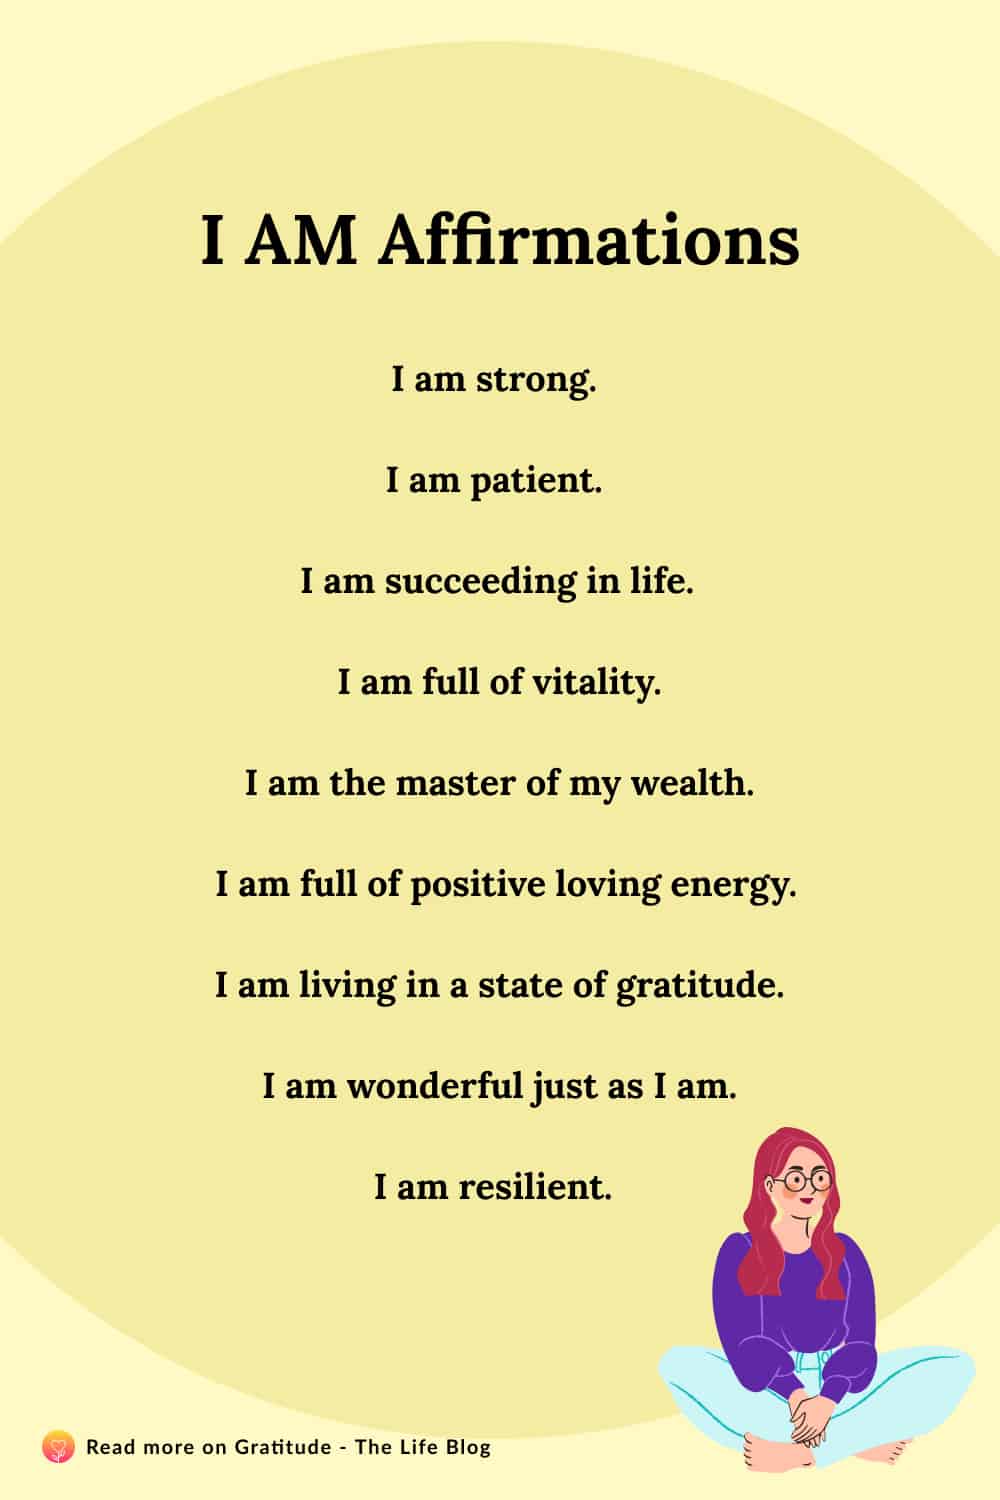 Image with list of I am affirmations